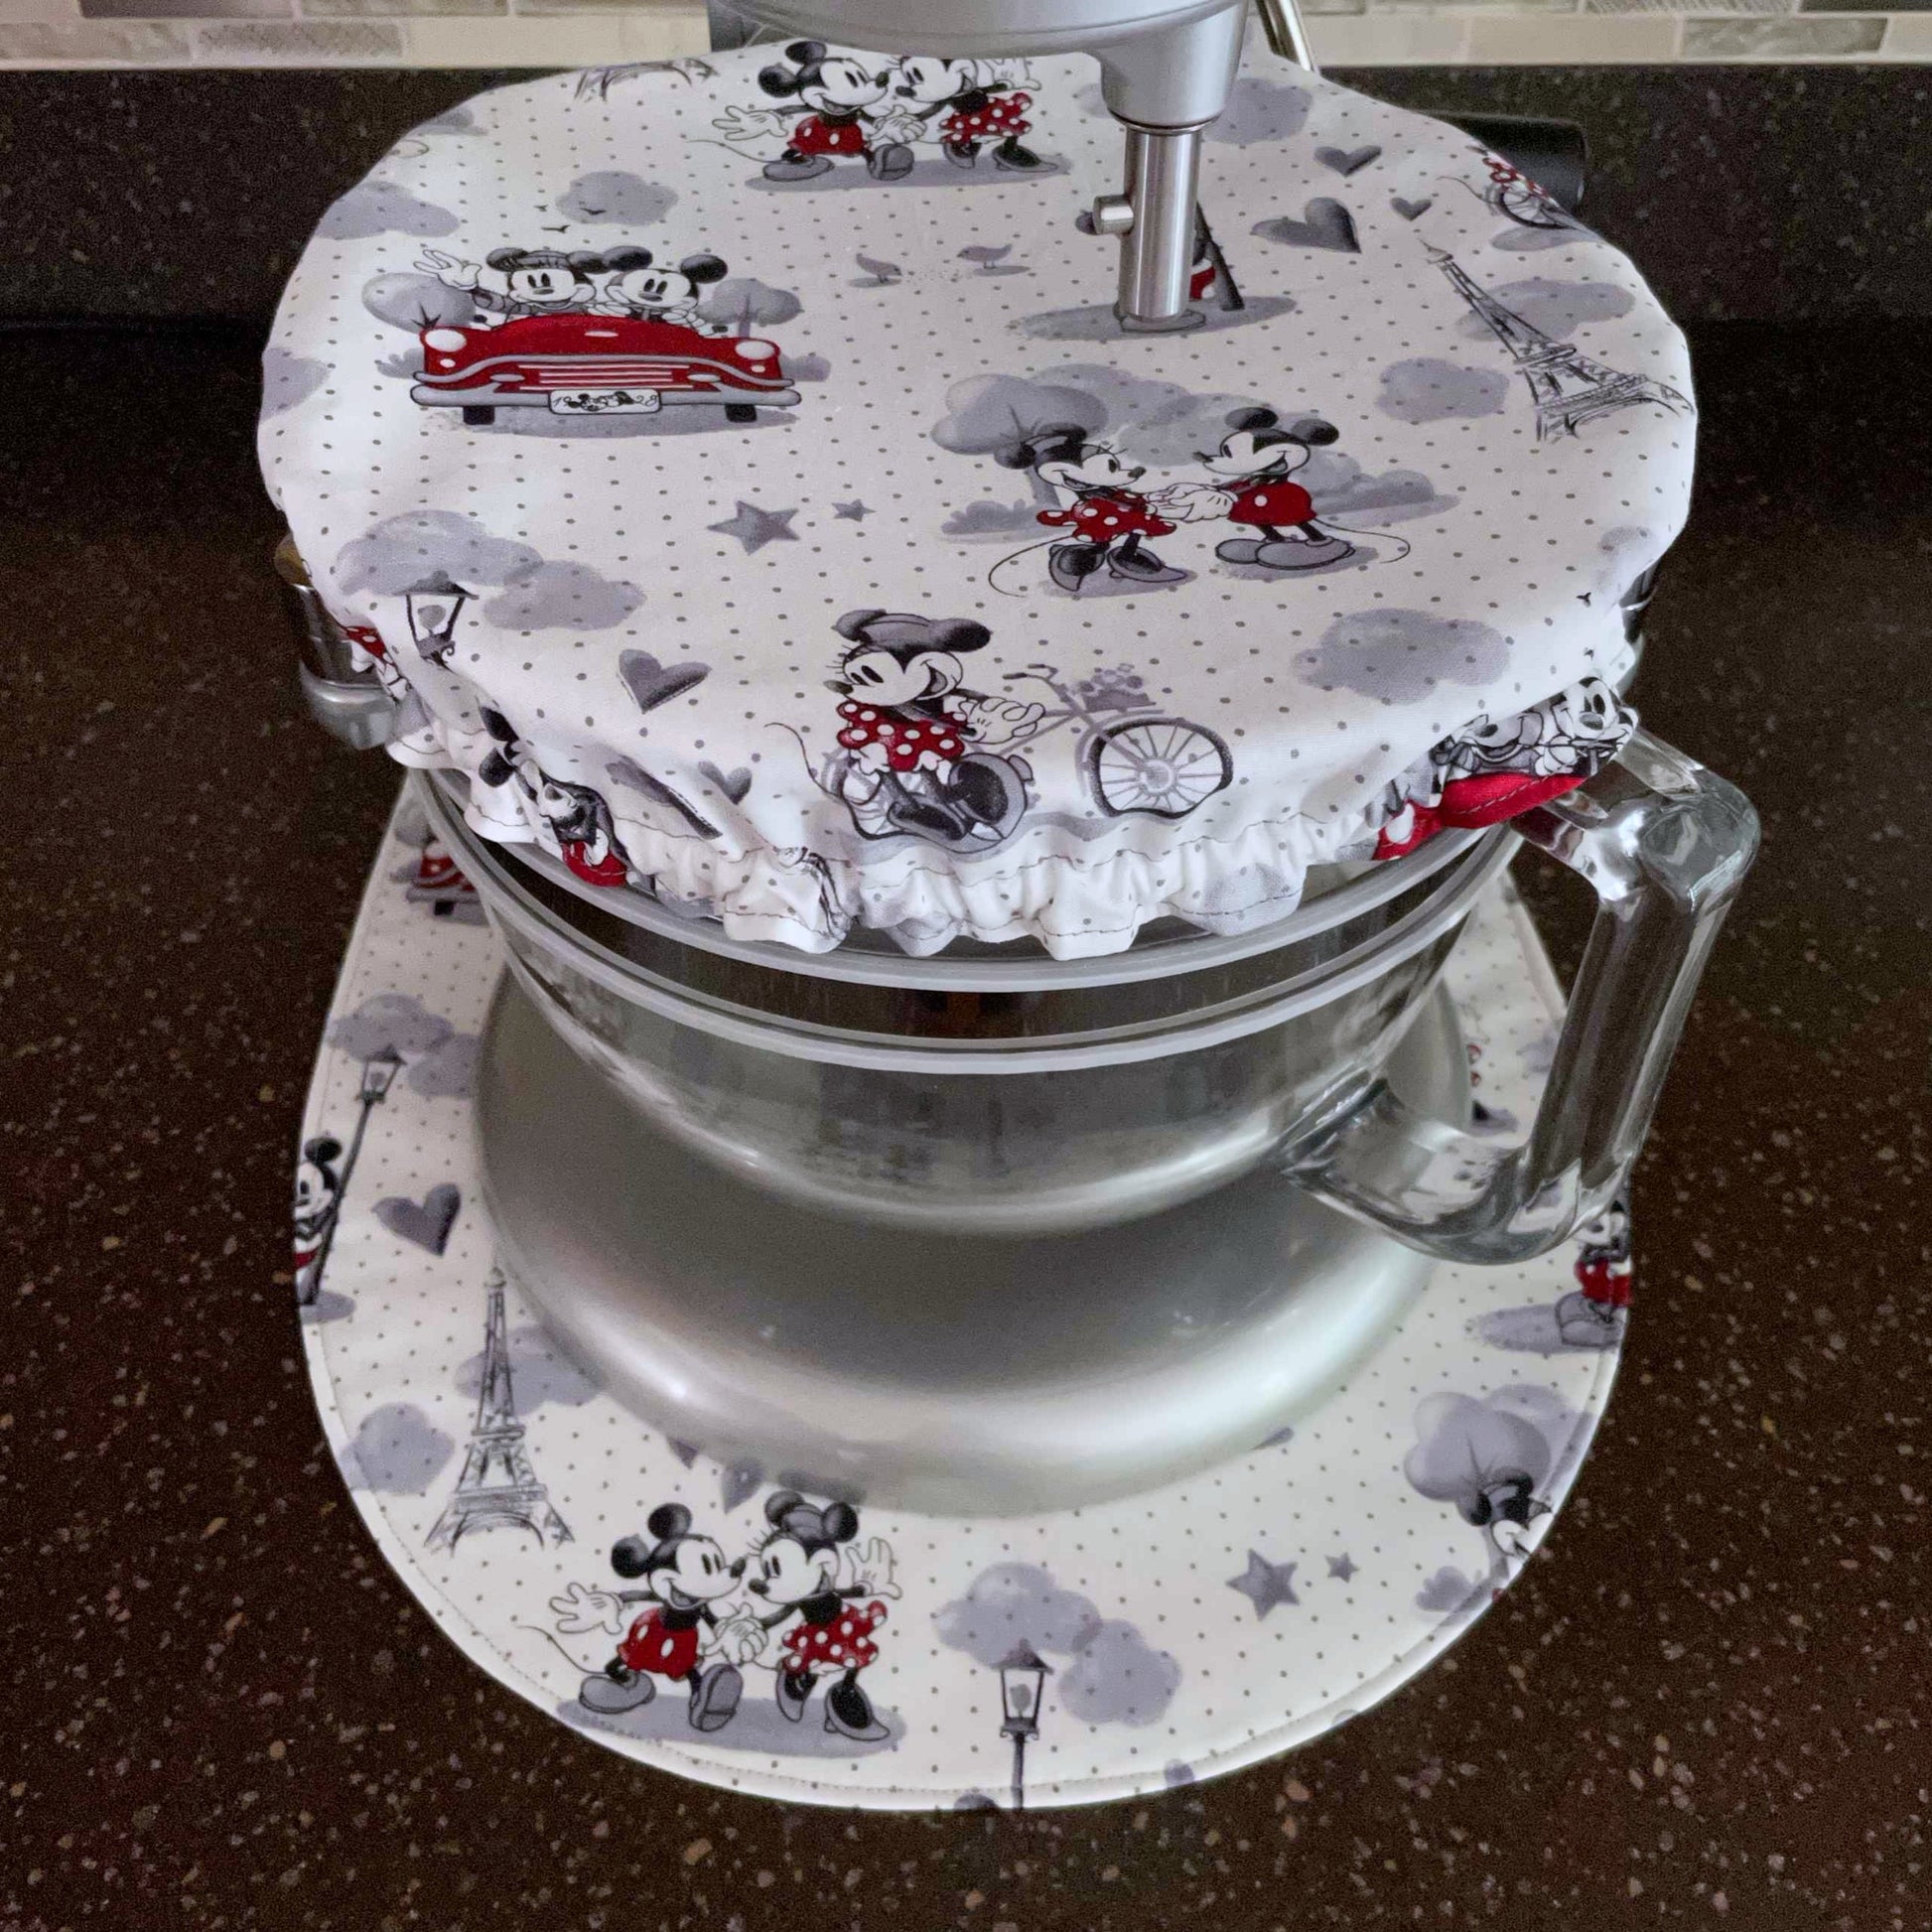 Mickey and Minnie Bowl cover and Mixer Slider Mat